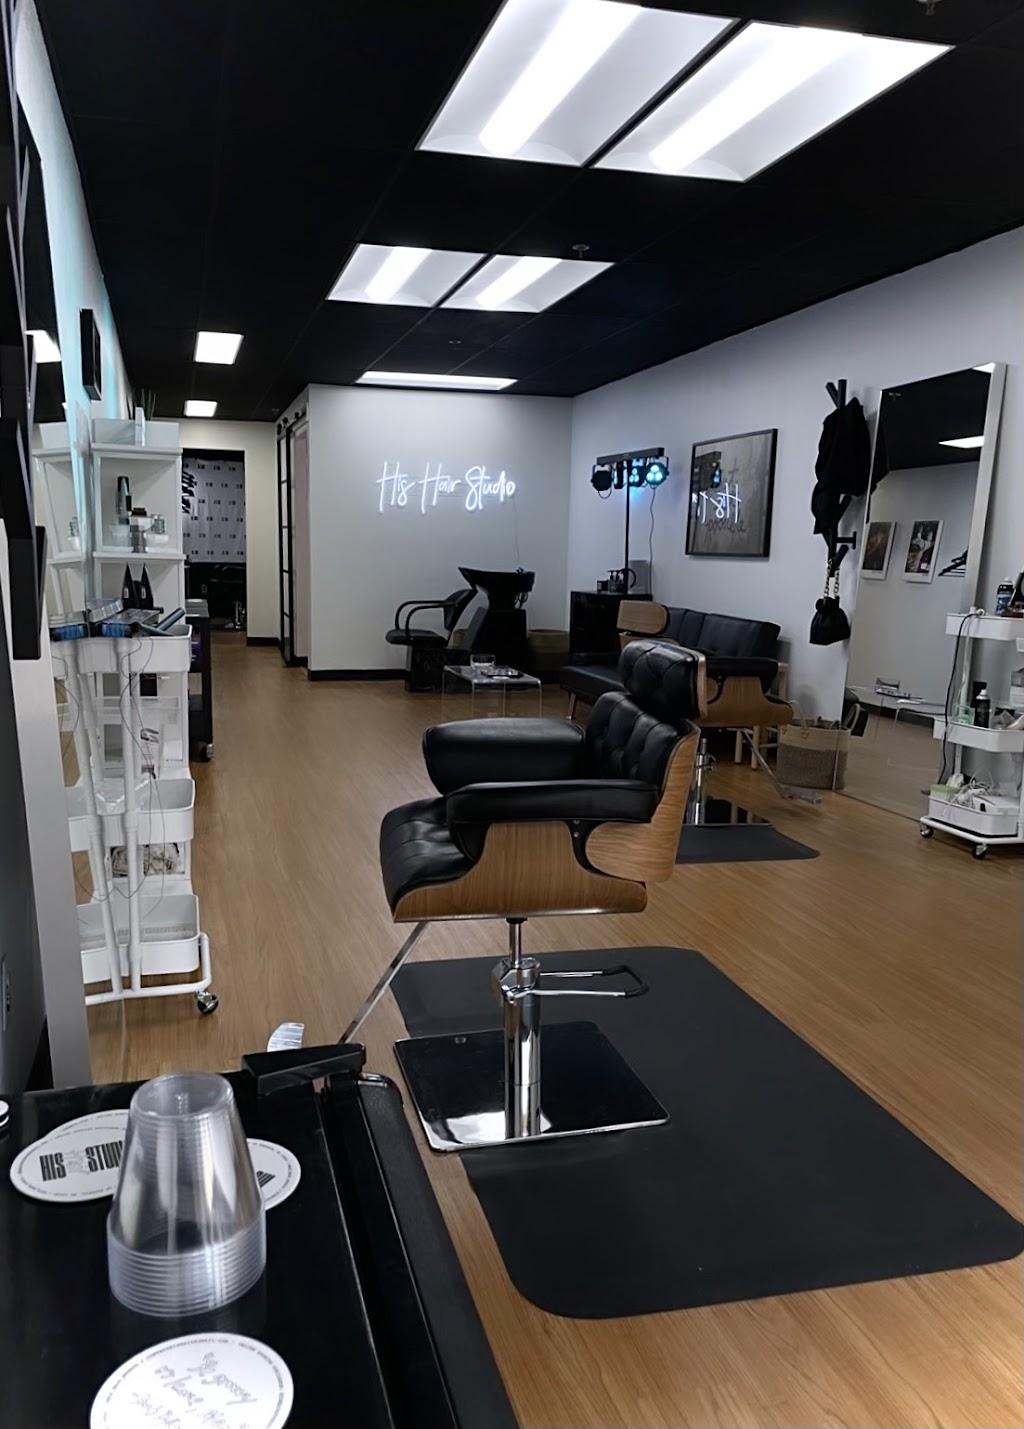 His Hair Studio | 150 Allendale Rd Ste 3340, King of Prussia, PA 19406 | Phone: (215) 802-3865